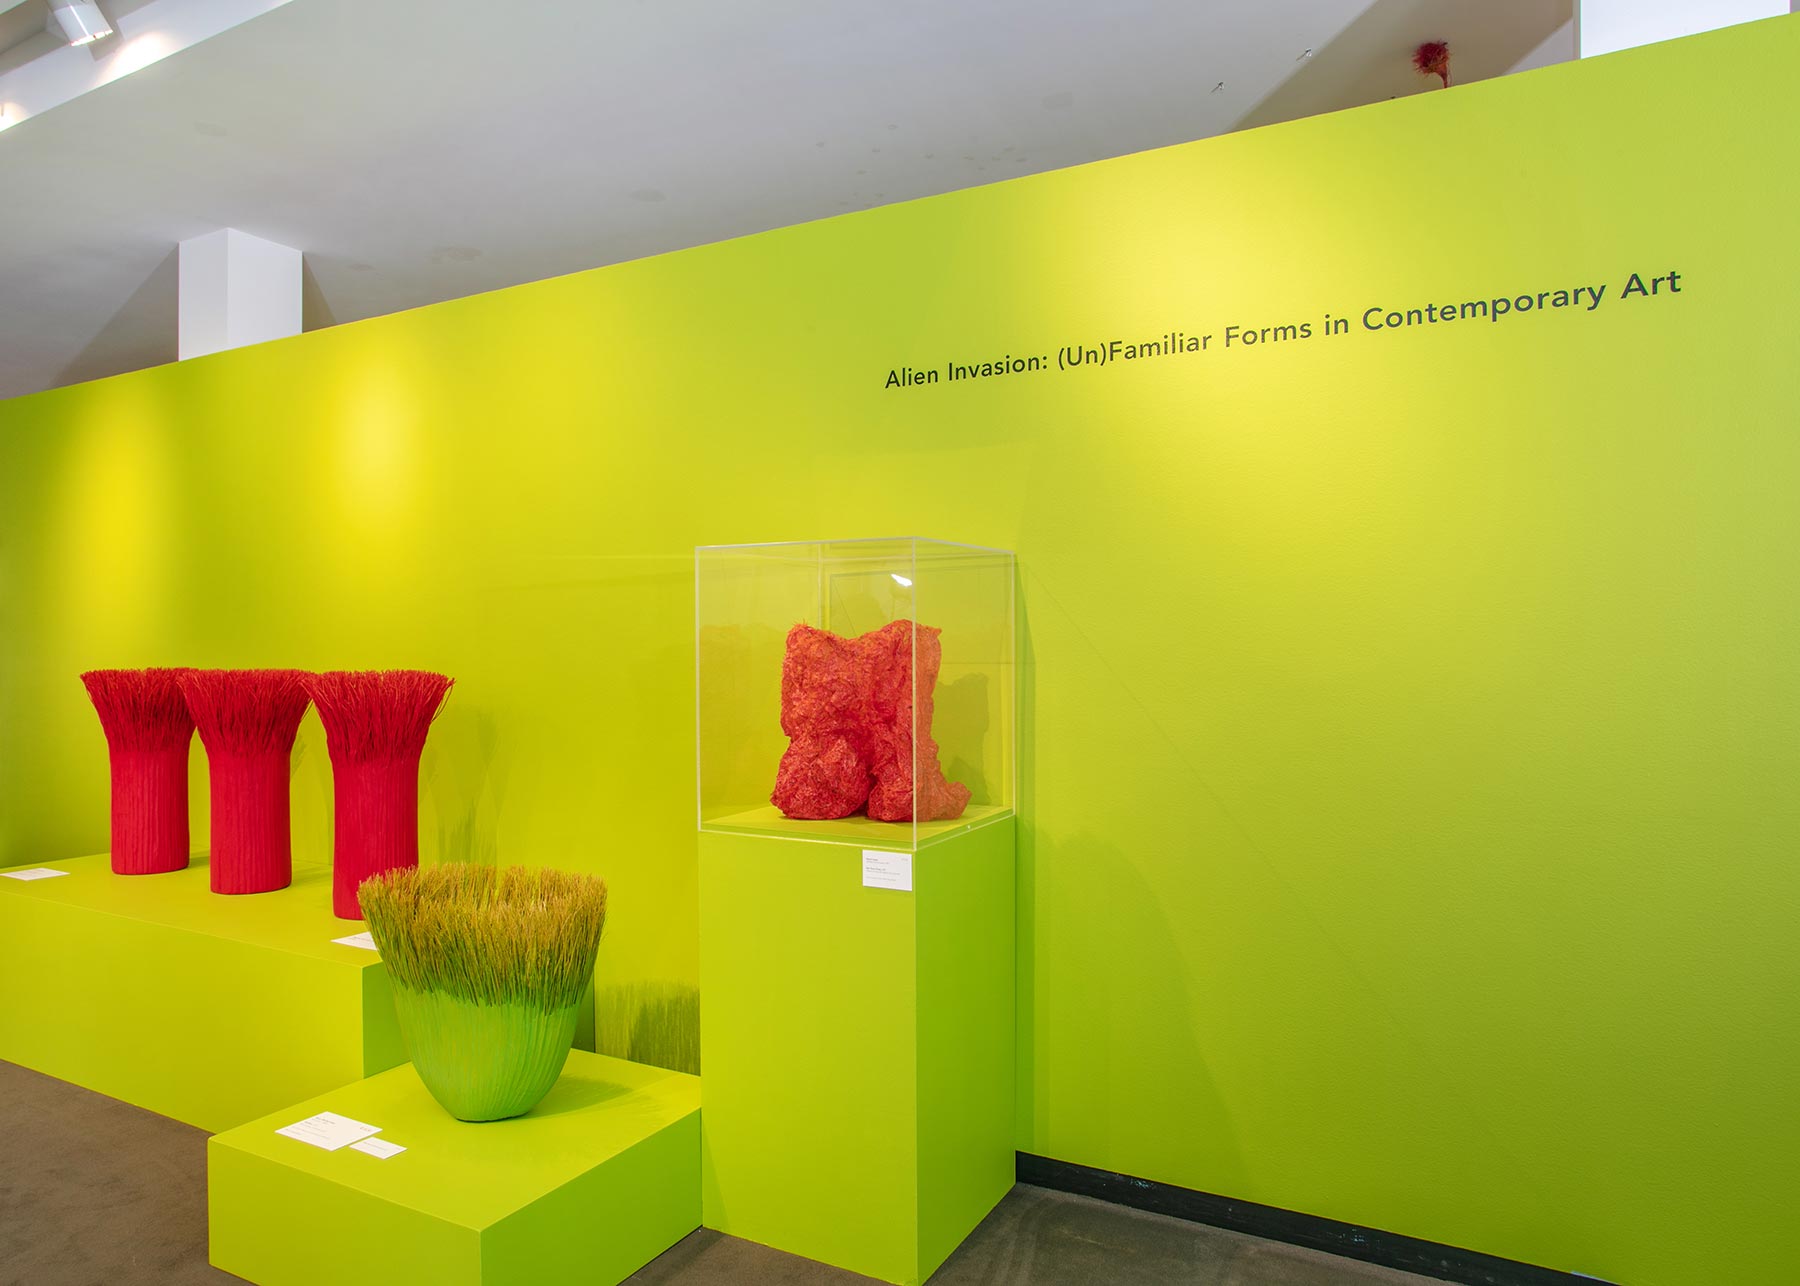 Installation view of Alien Invasion: (Un)Familiar Forms in Contemporary Art, with large-scale baskets against a lime green wall